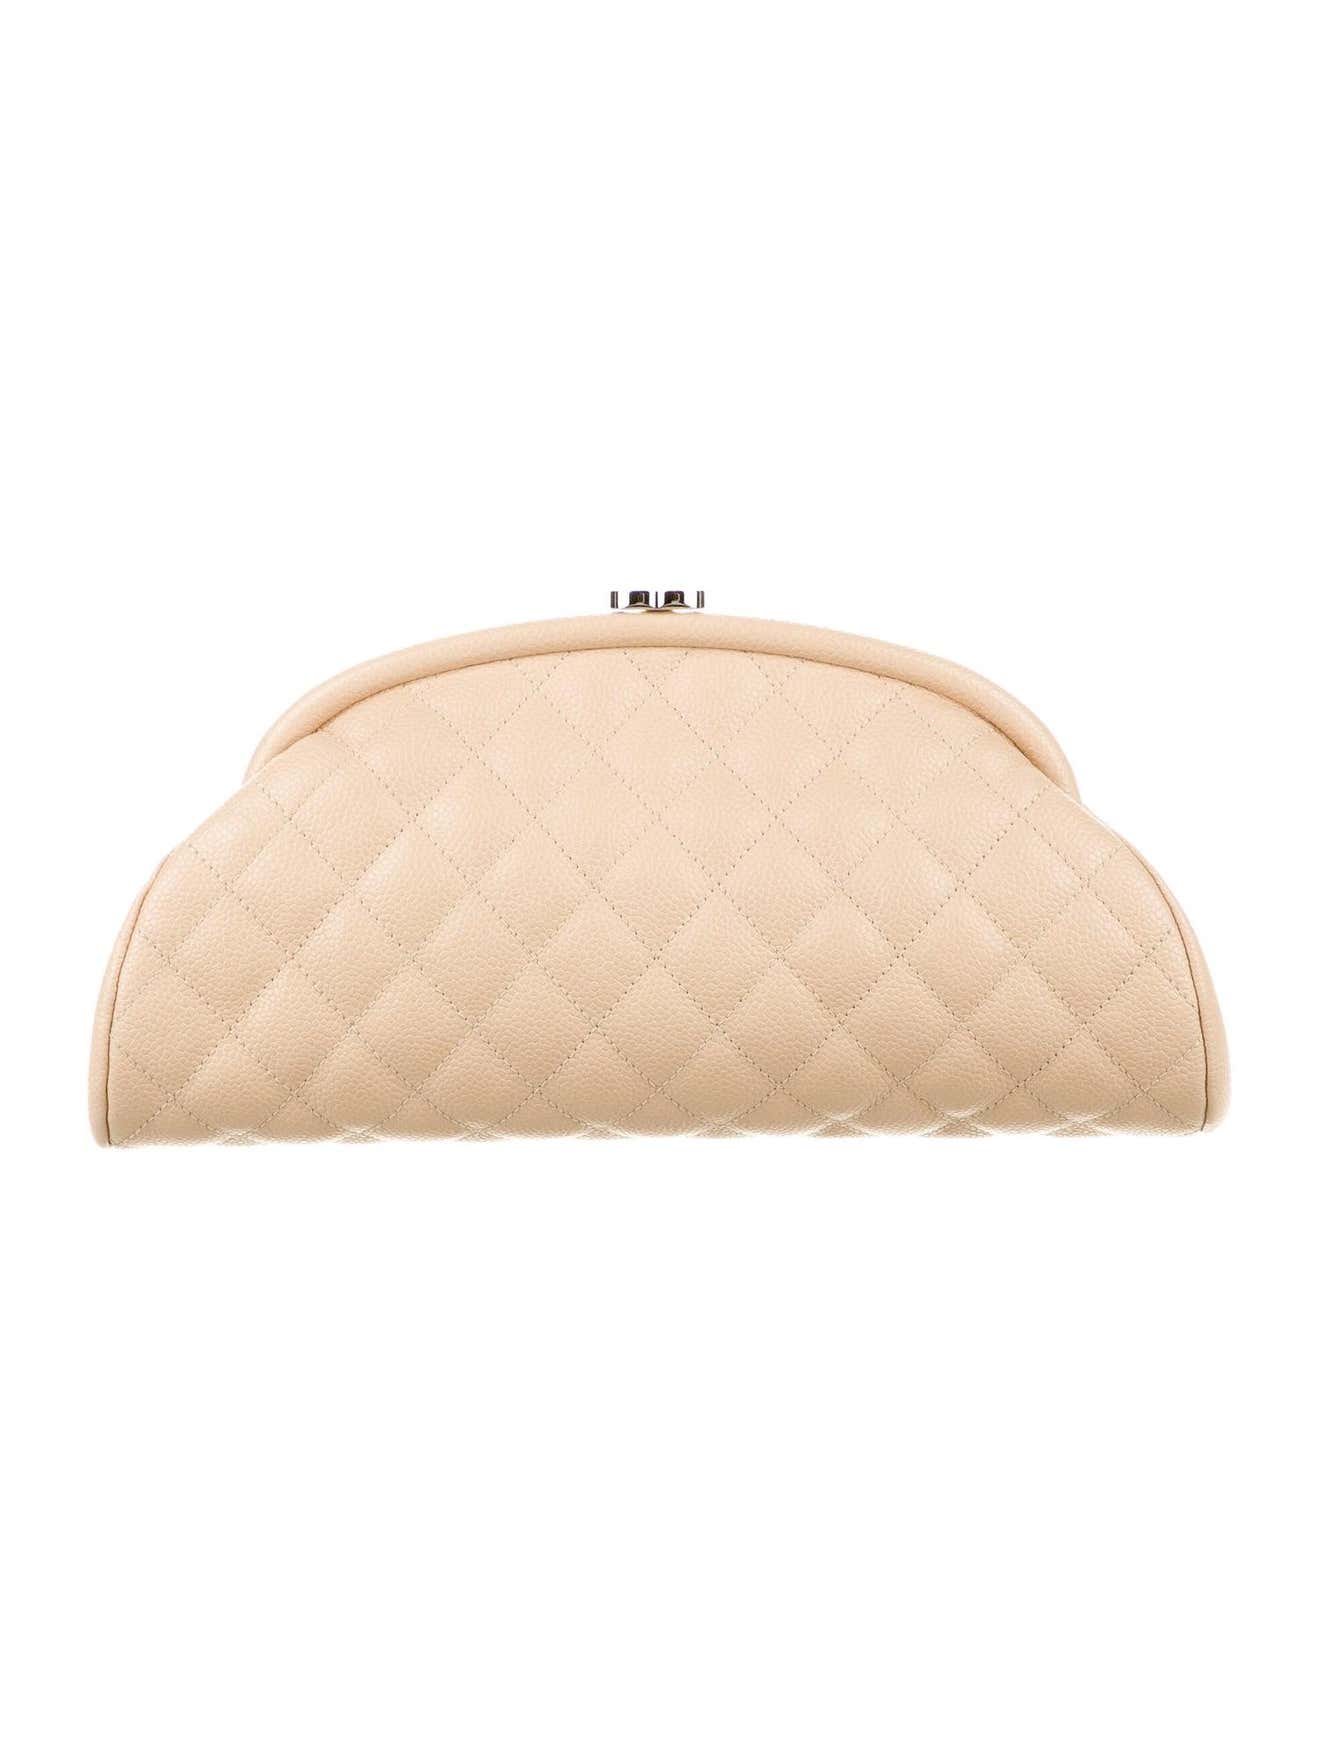 Chanel Classic Vintage Beige CC Diamond Quilted Caviar Timeless Clutch